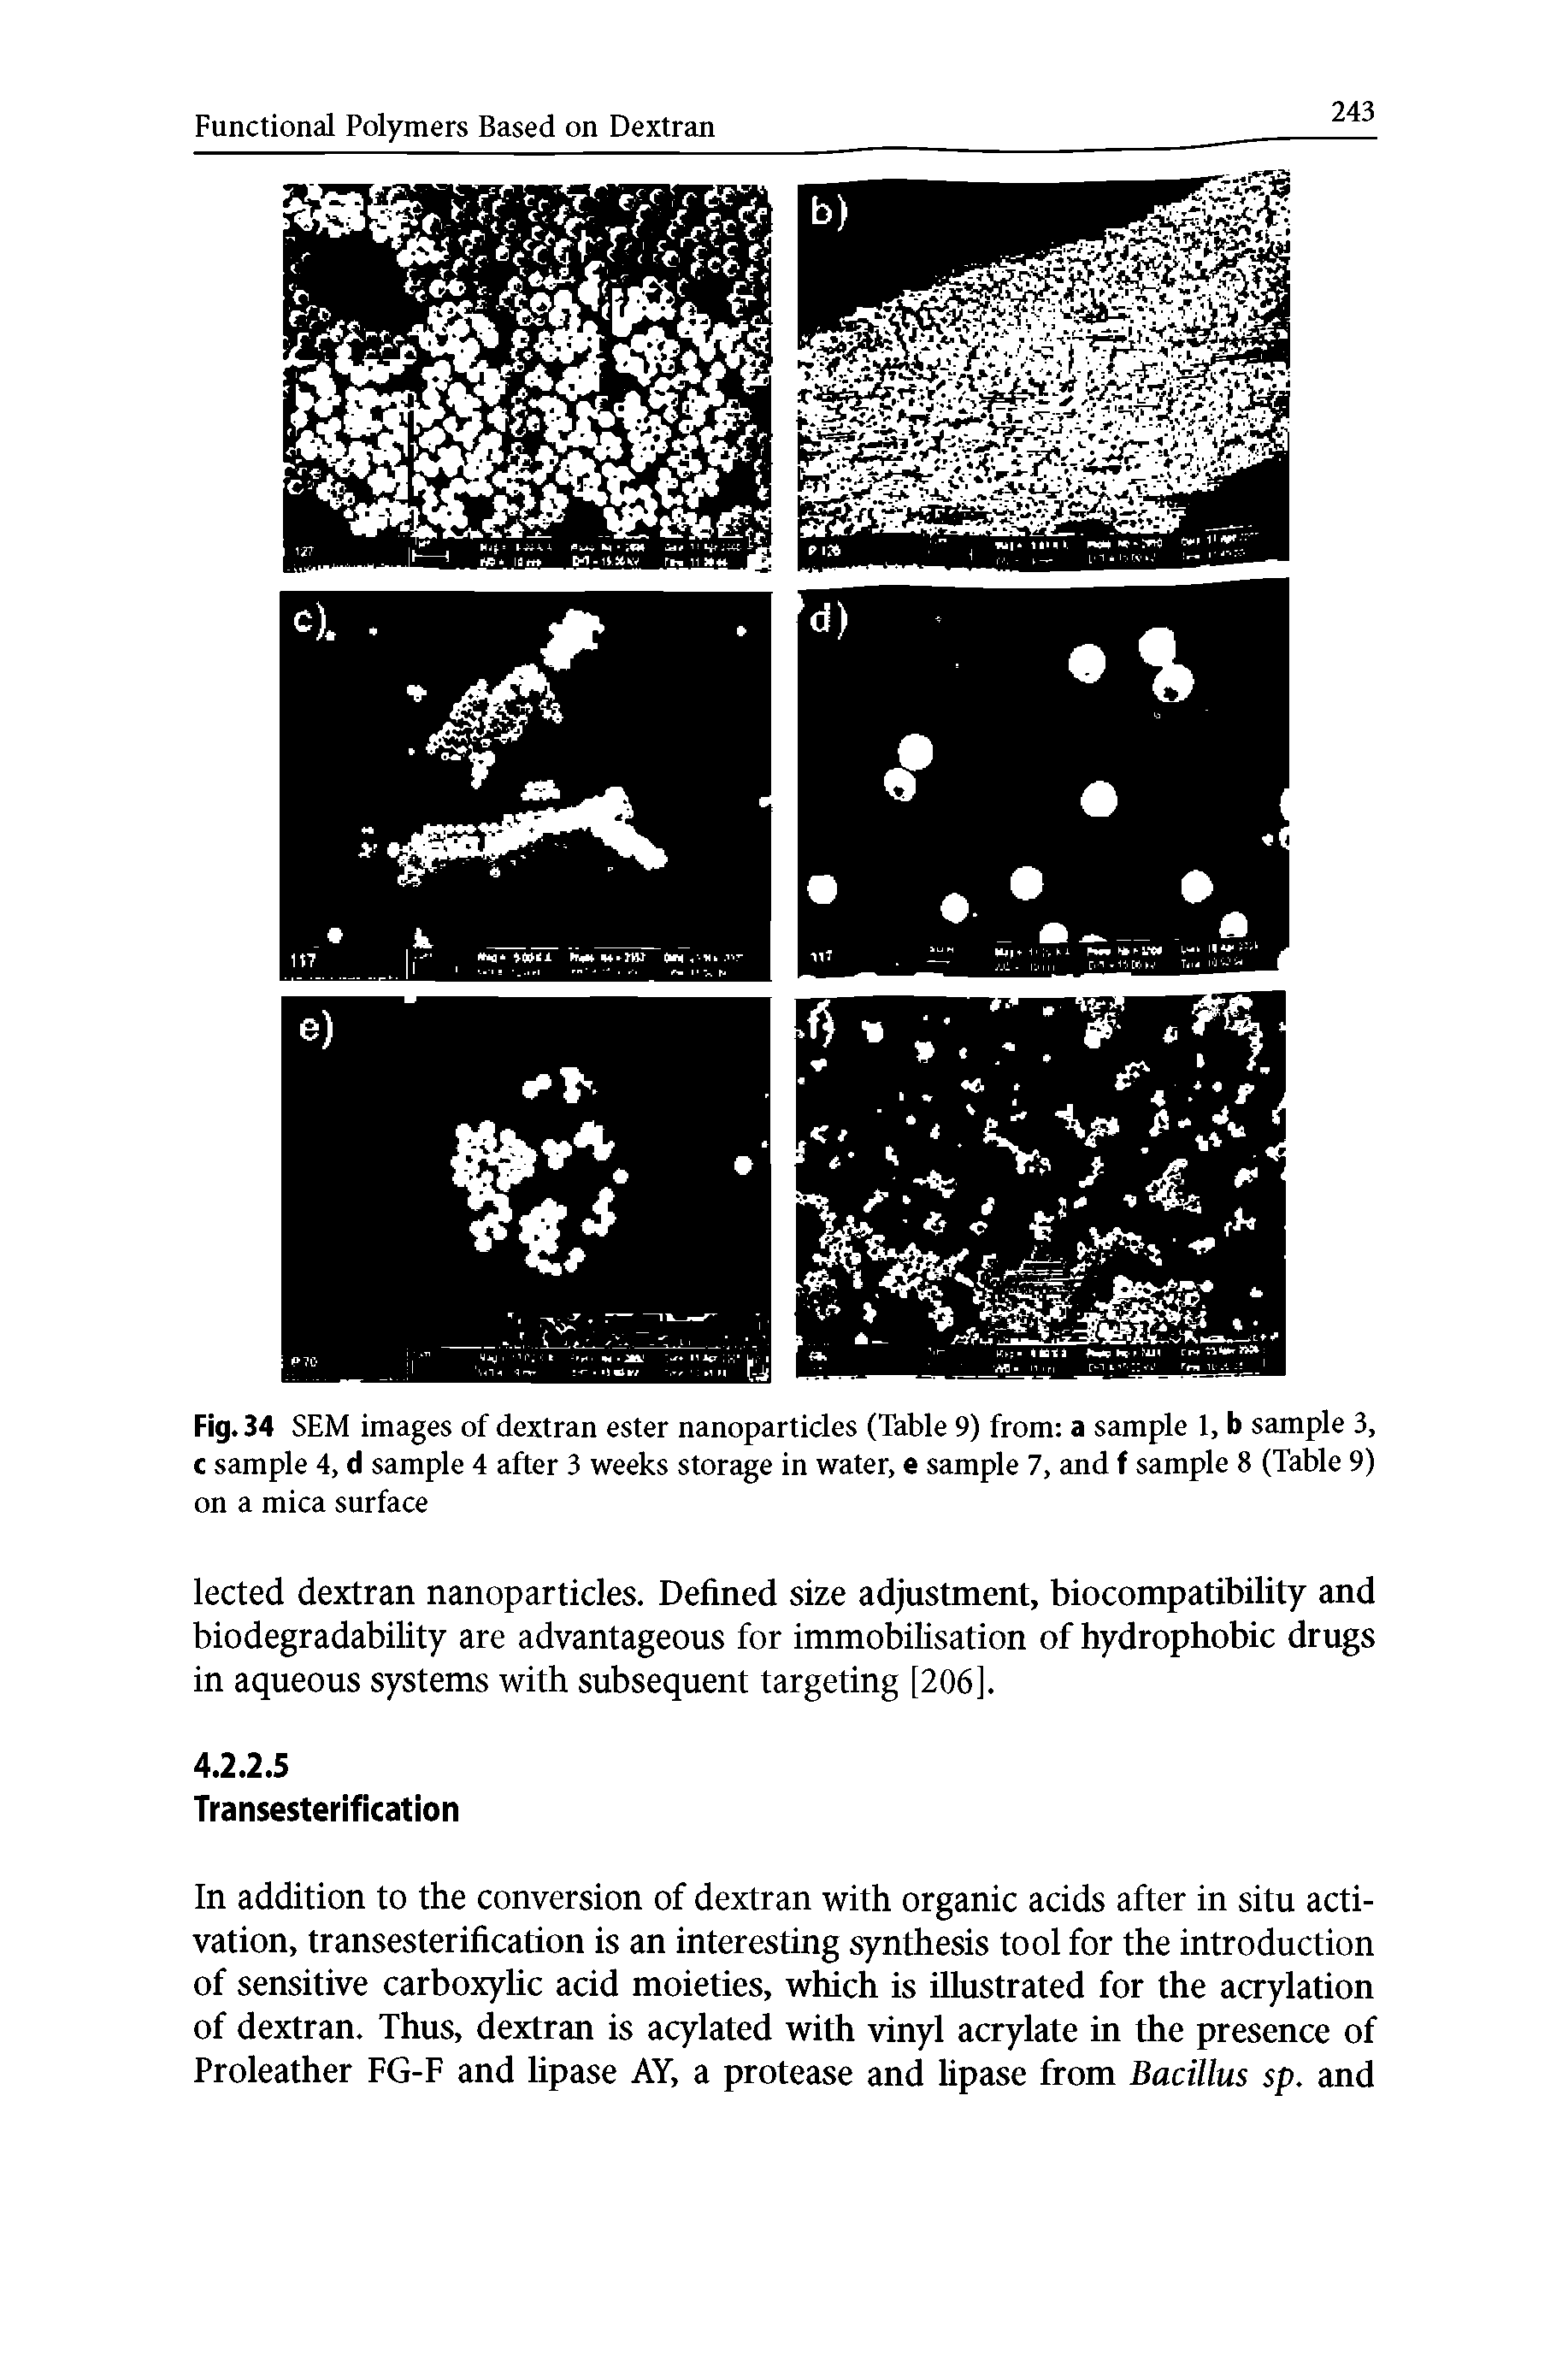 Fig. 34 SEM images of dextran ester nanoparticles (Table 9) from a sample 1, b sample 3, c sample 4, d sample 4 after 3 weeks storage in water, e sample 7, and f sample 8 (Table 9) on a mica surface...